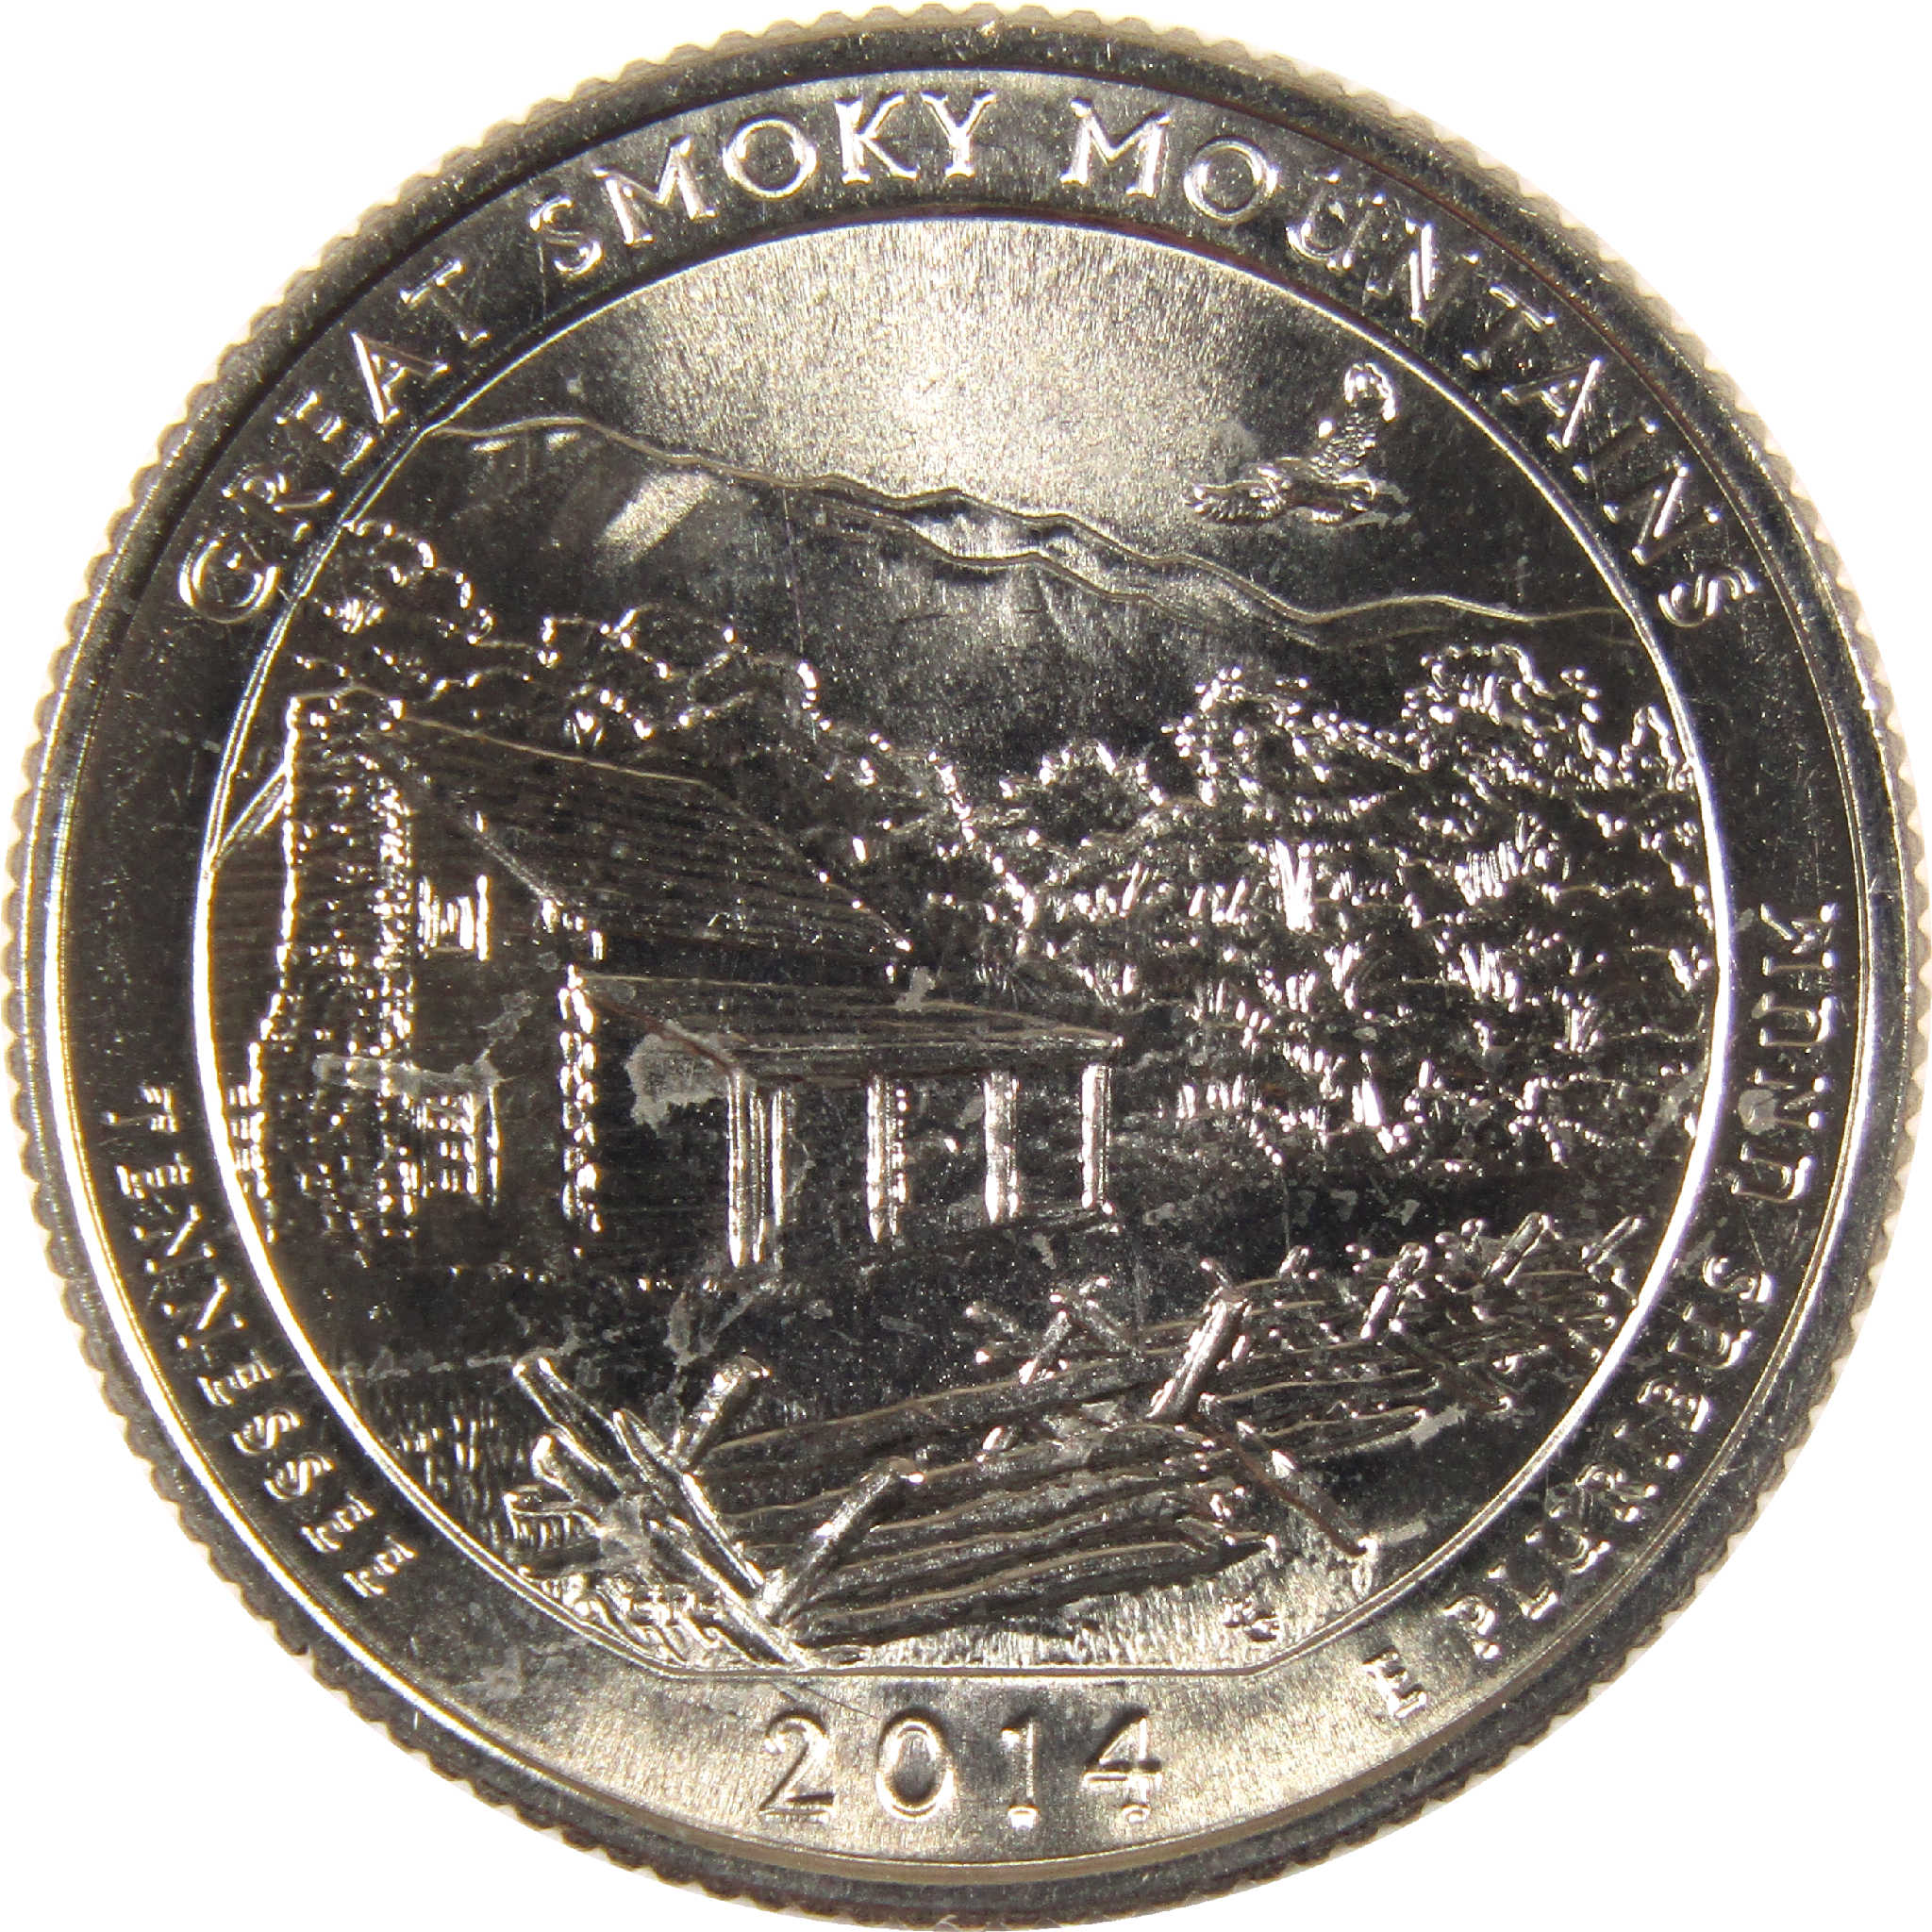 2014 S Great Smoky Mountains National Park Quarter Uncirculated Clad